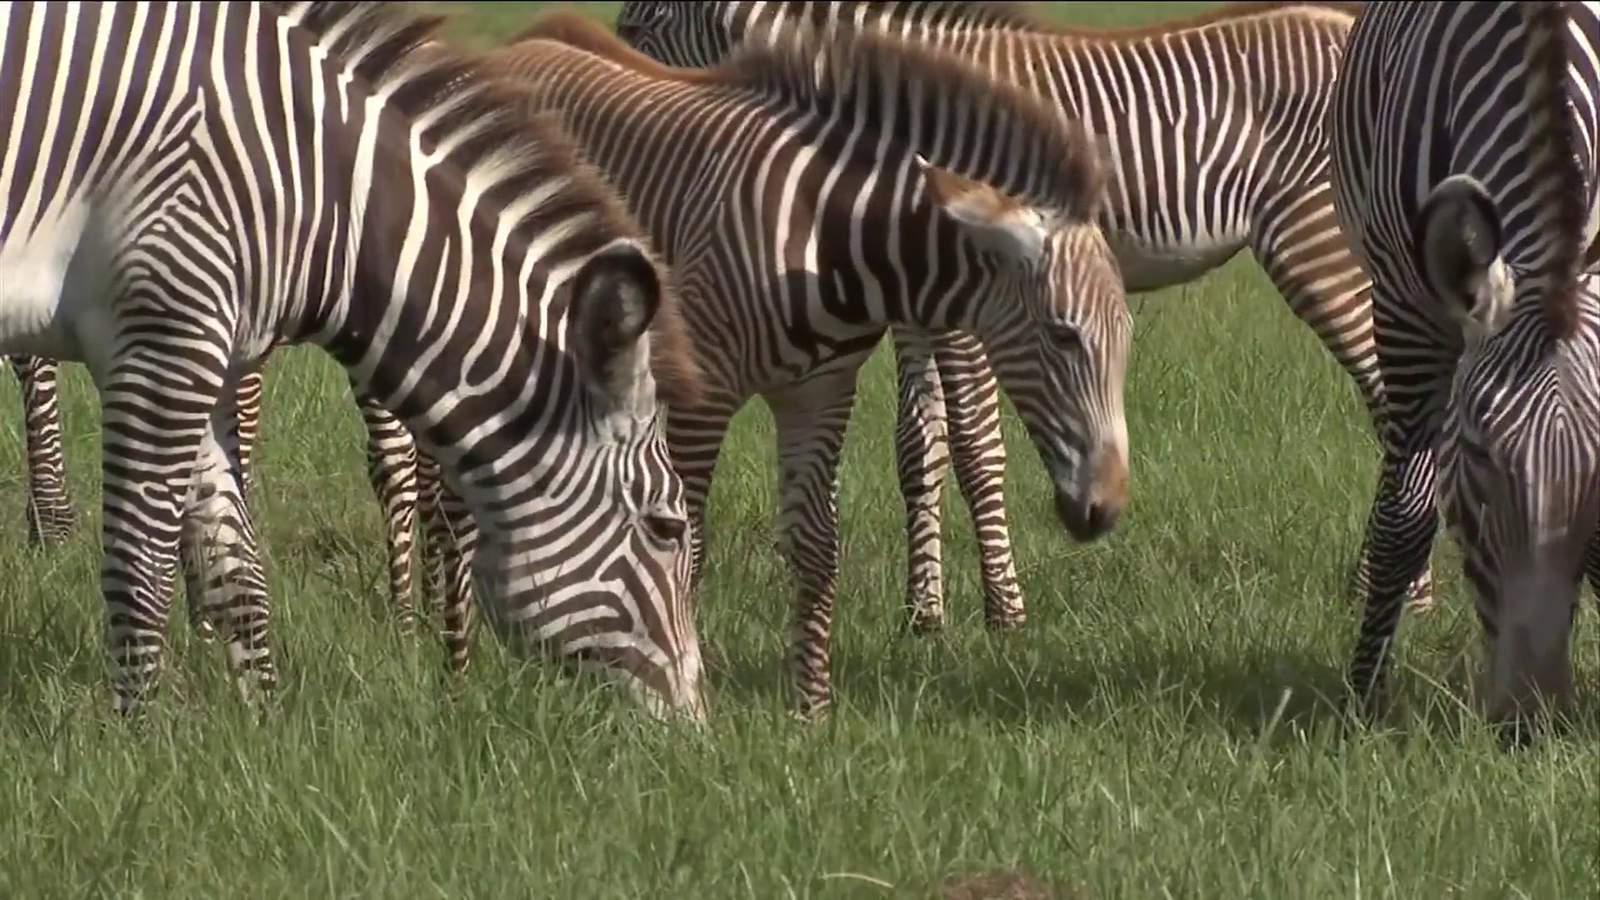 White Oak Conservation welcomes four baby zebra foals